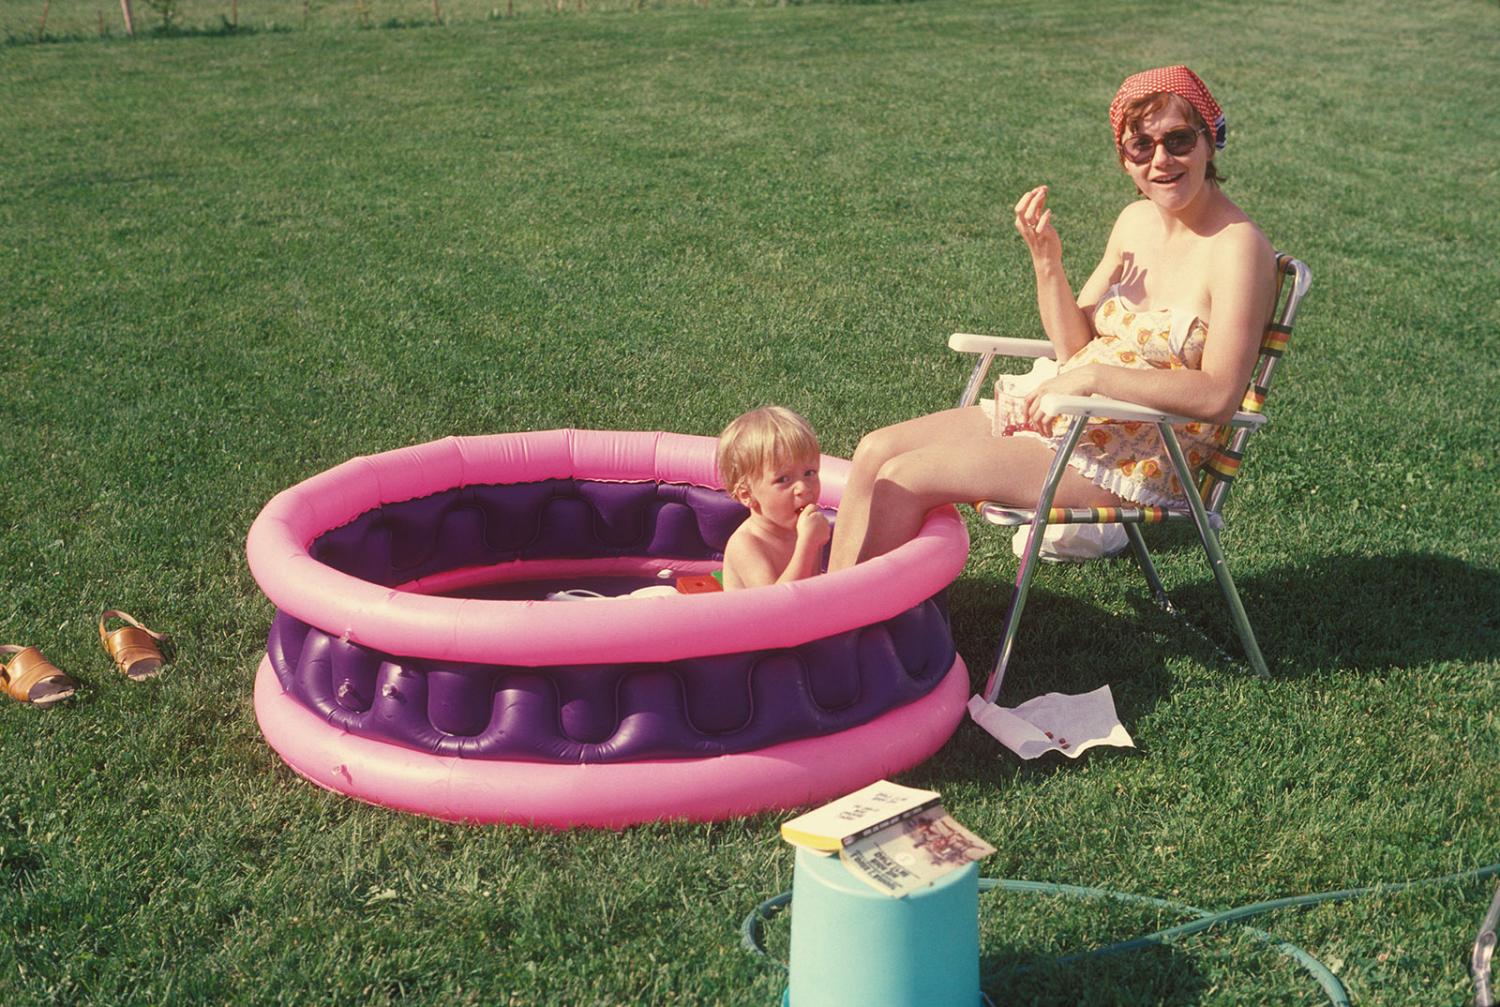 Mother and son together in a kiddie pool